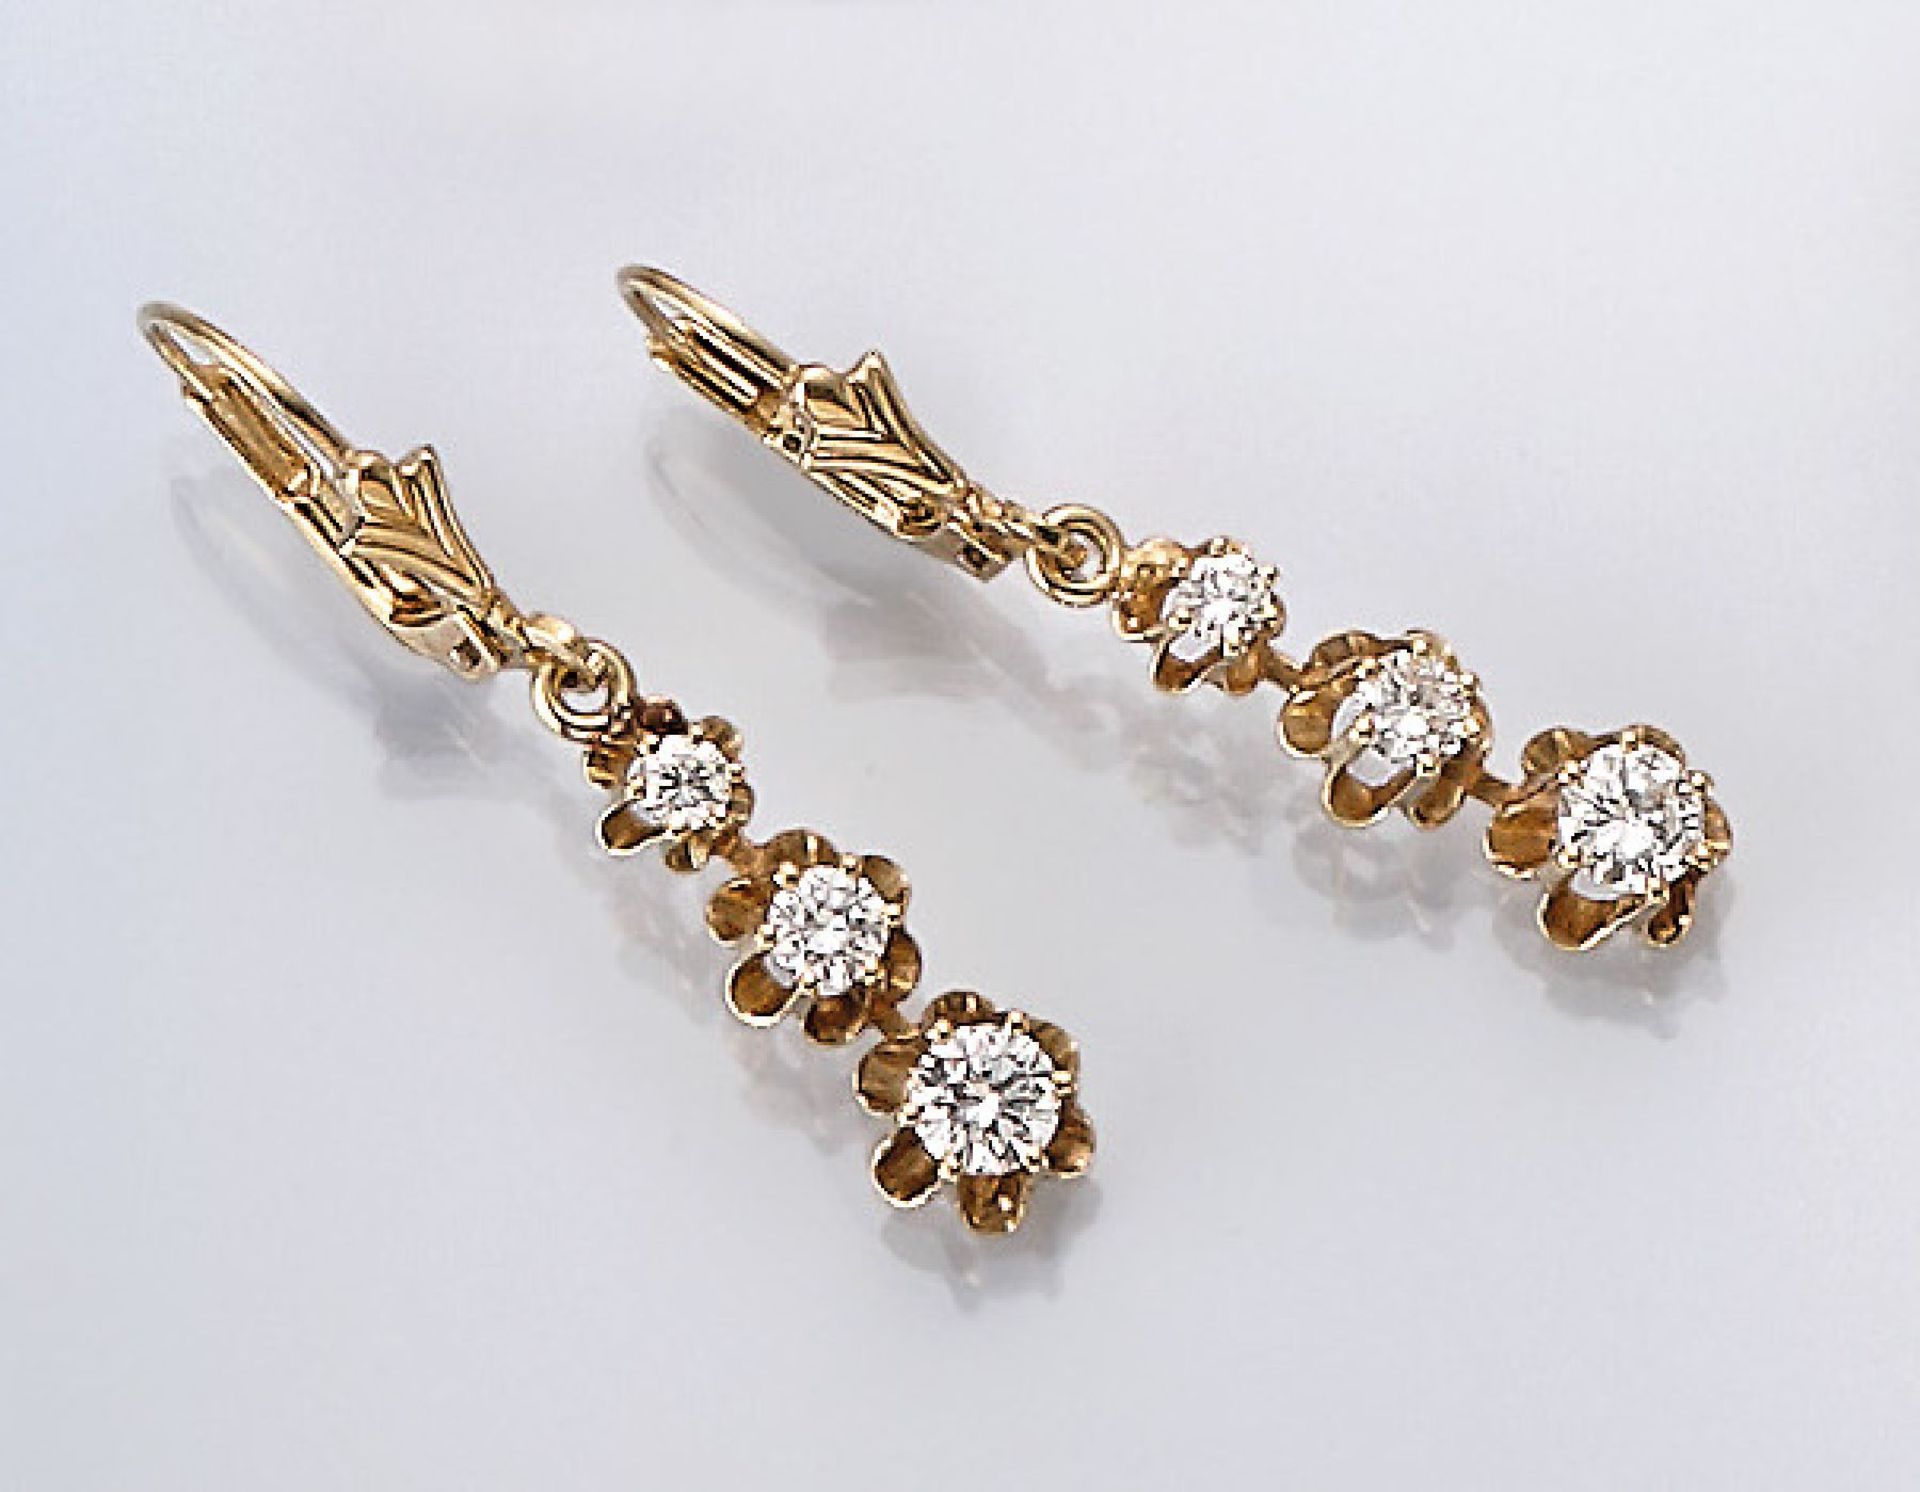 Pair of 14 kt gold earrings with brilliants , YG 585/000, 6 brilliants total approx. 1.0ct Top